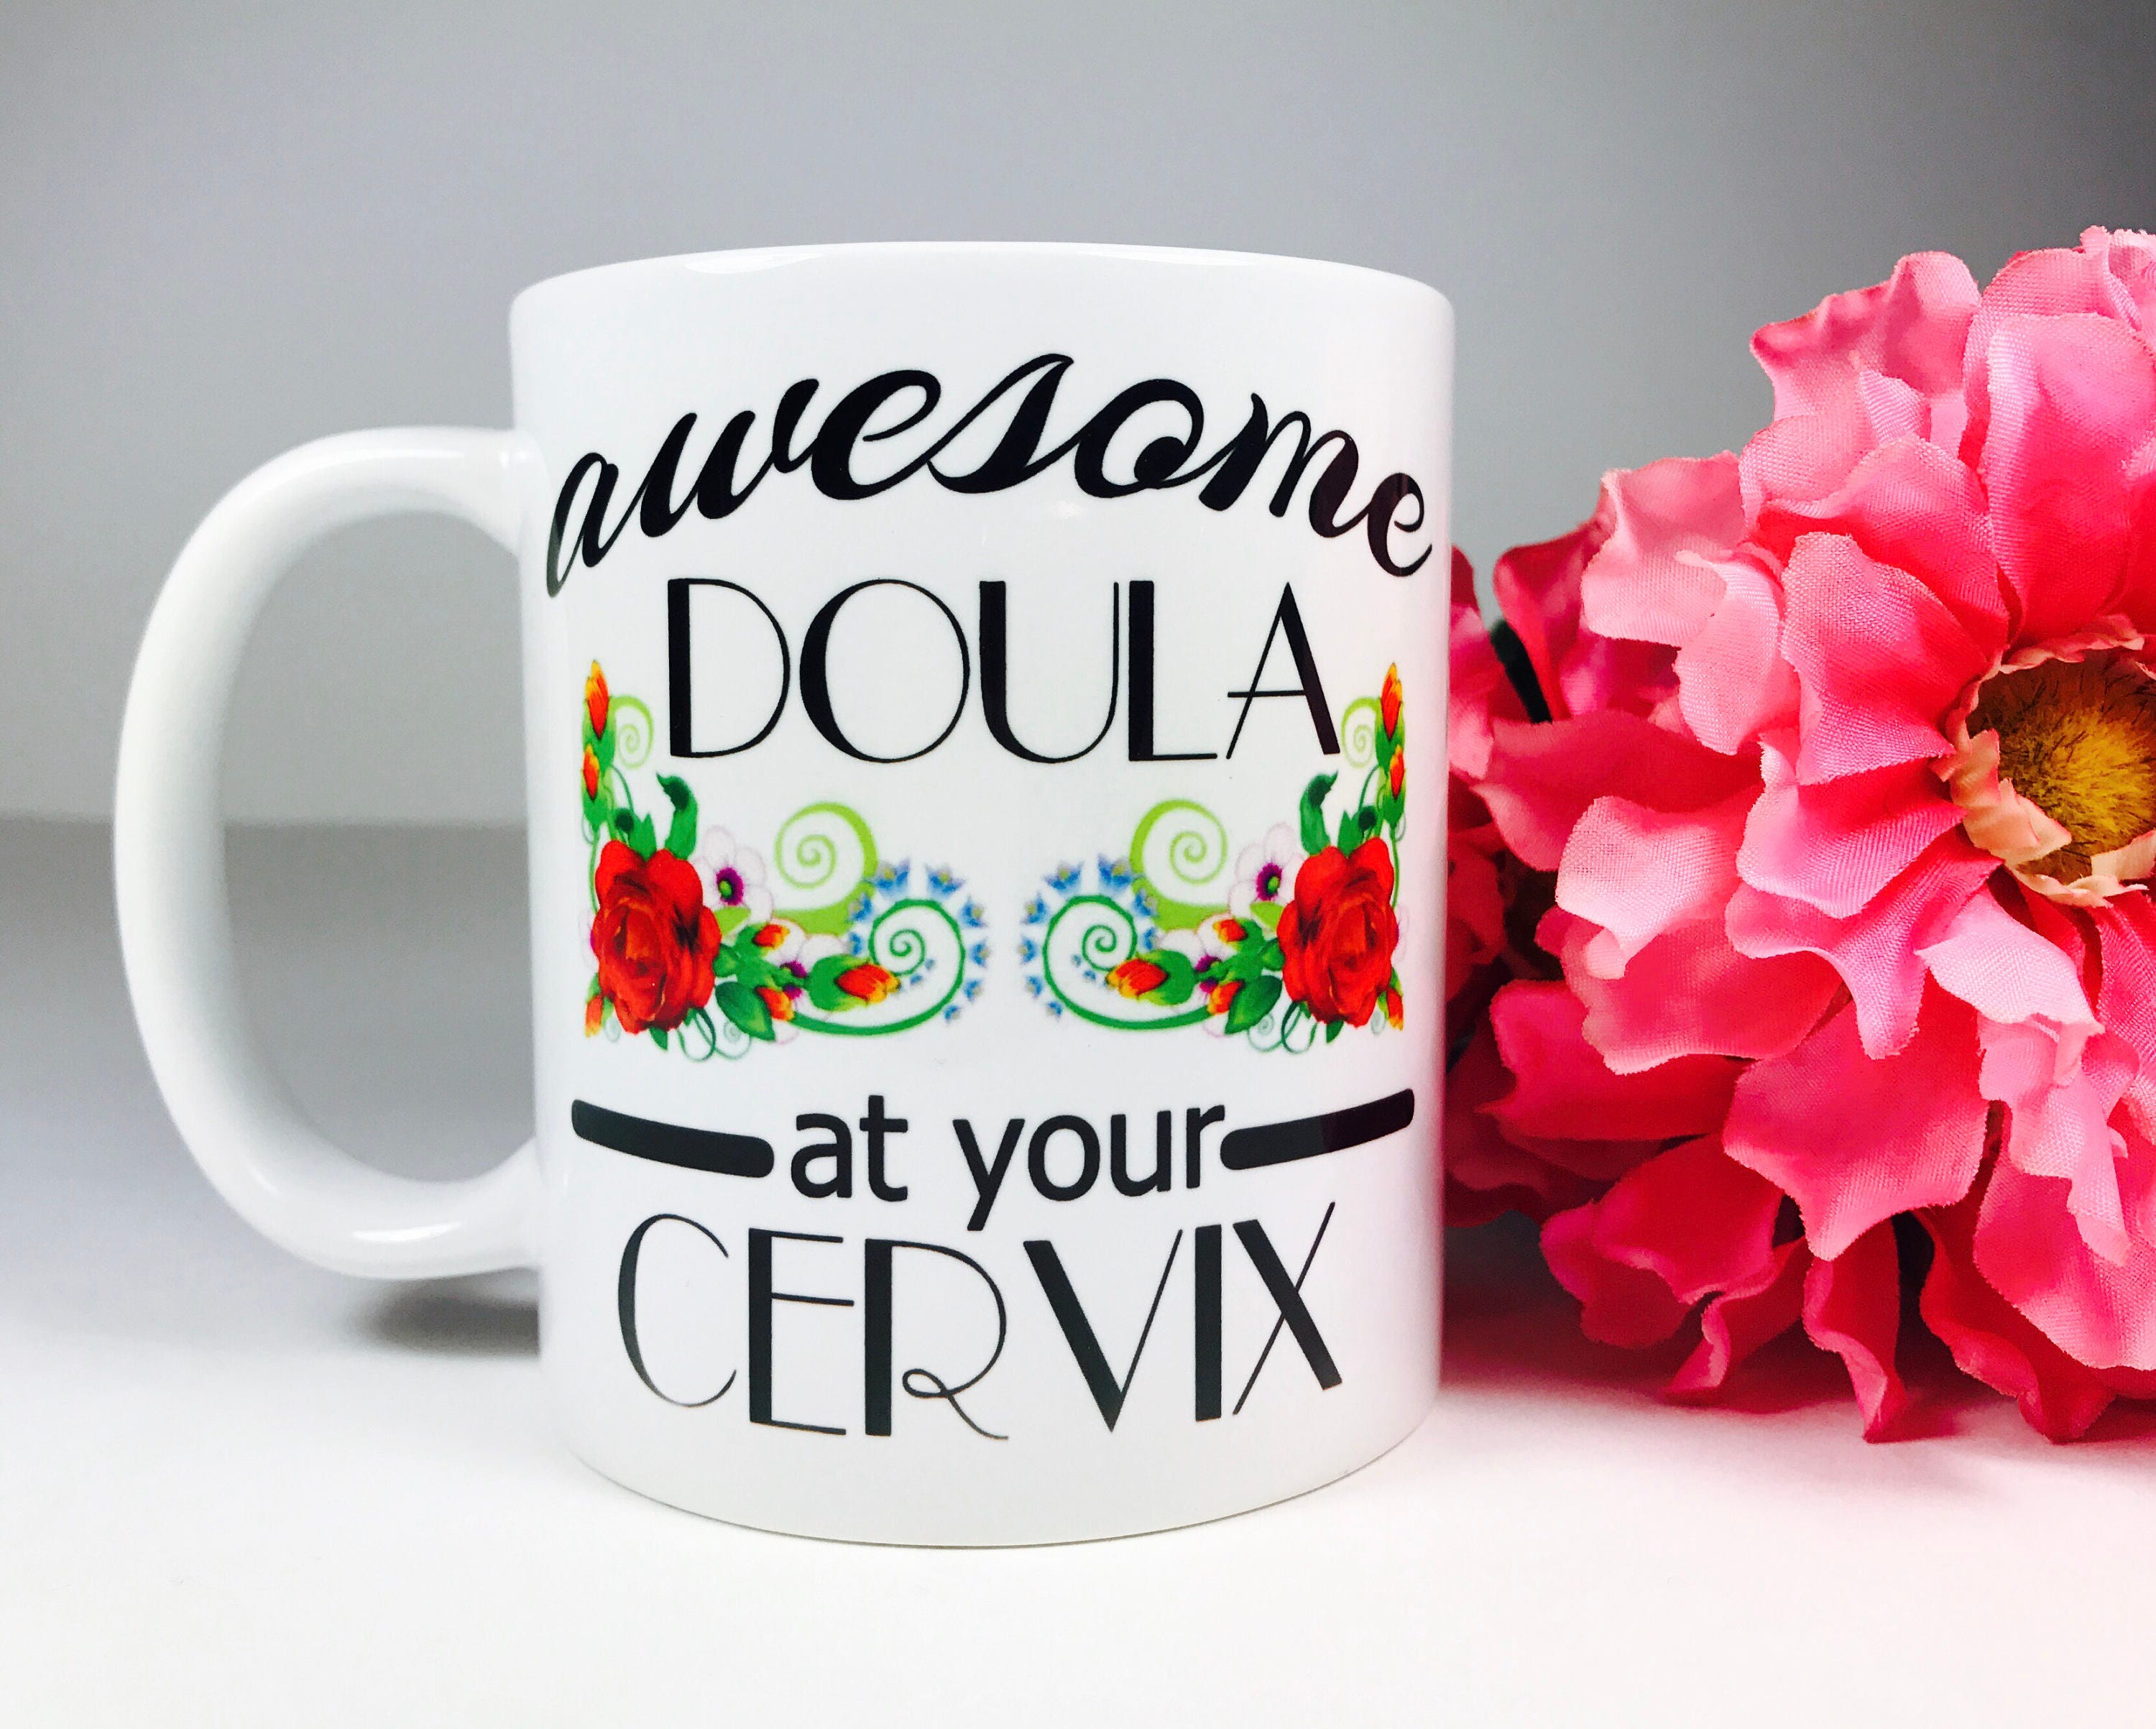 Awesome Doula At Your Cervix Midwife At Your Cervix Mug